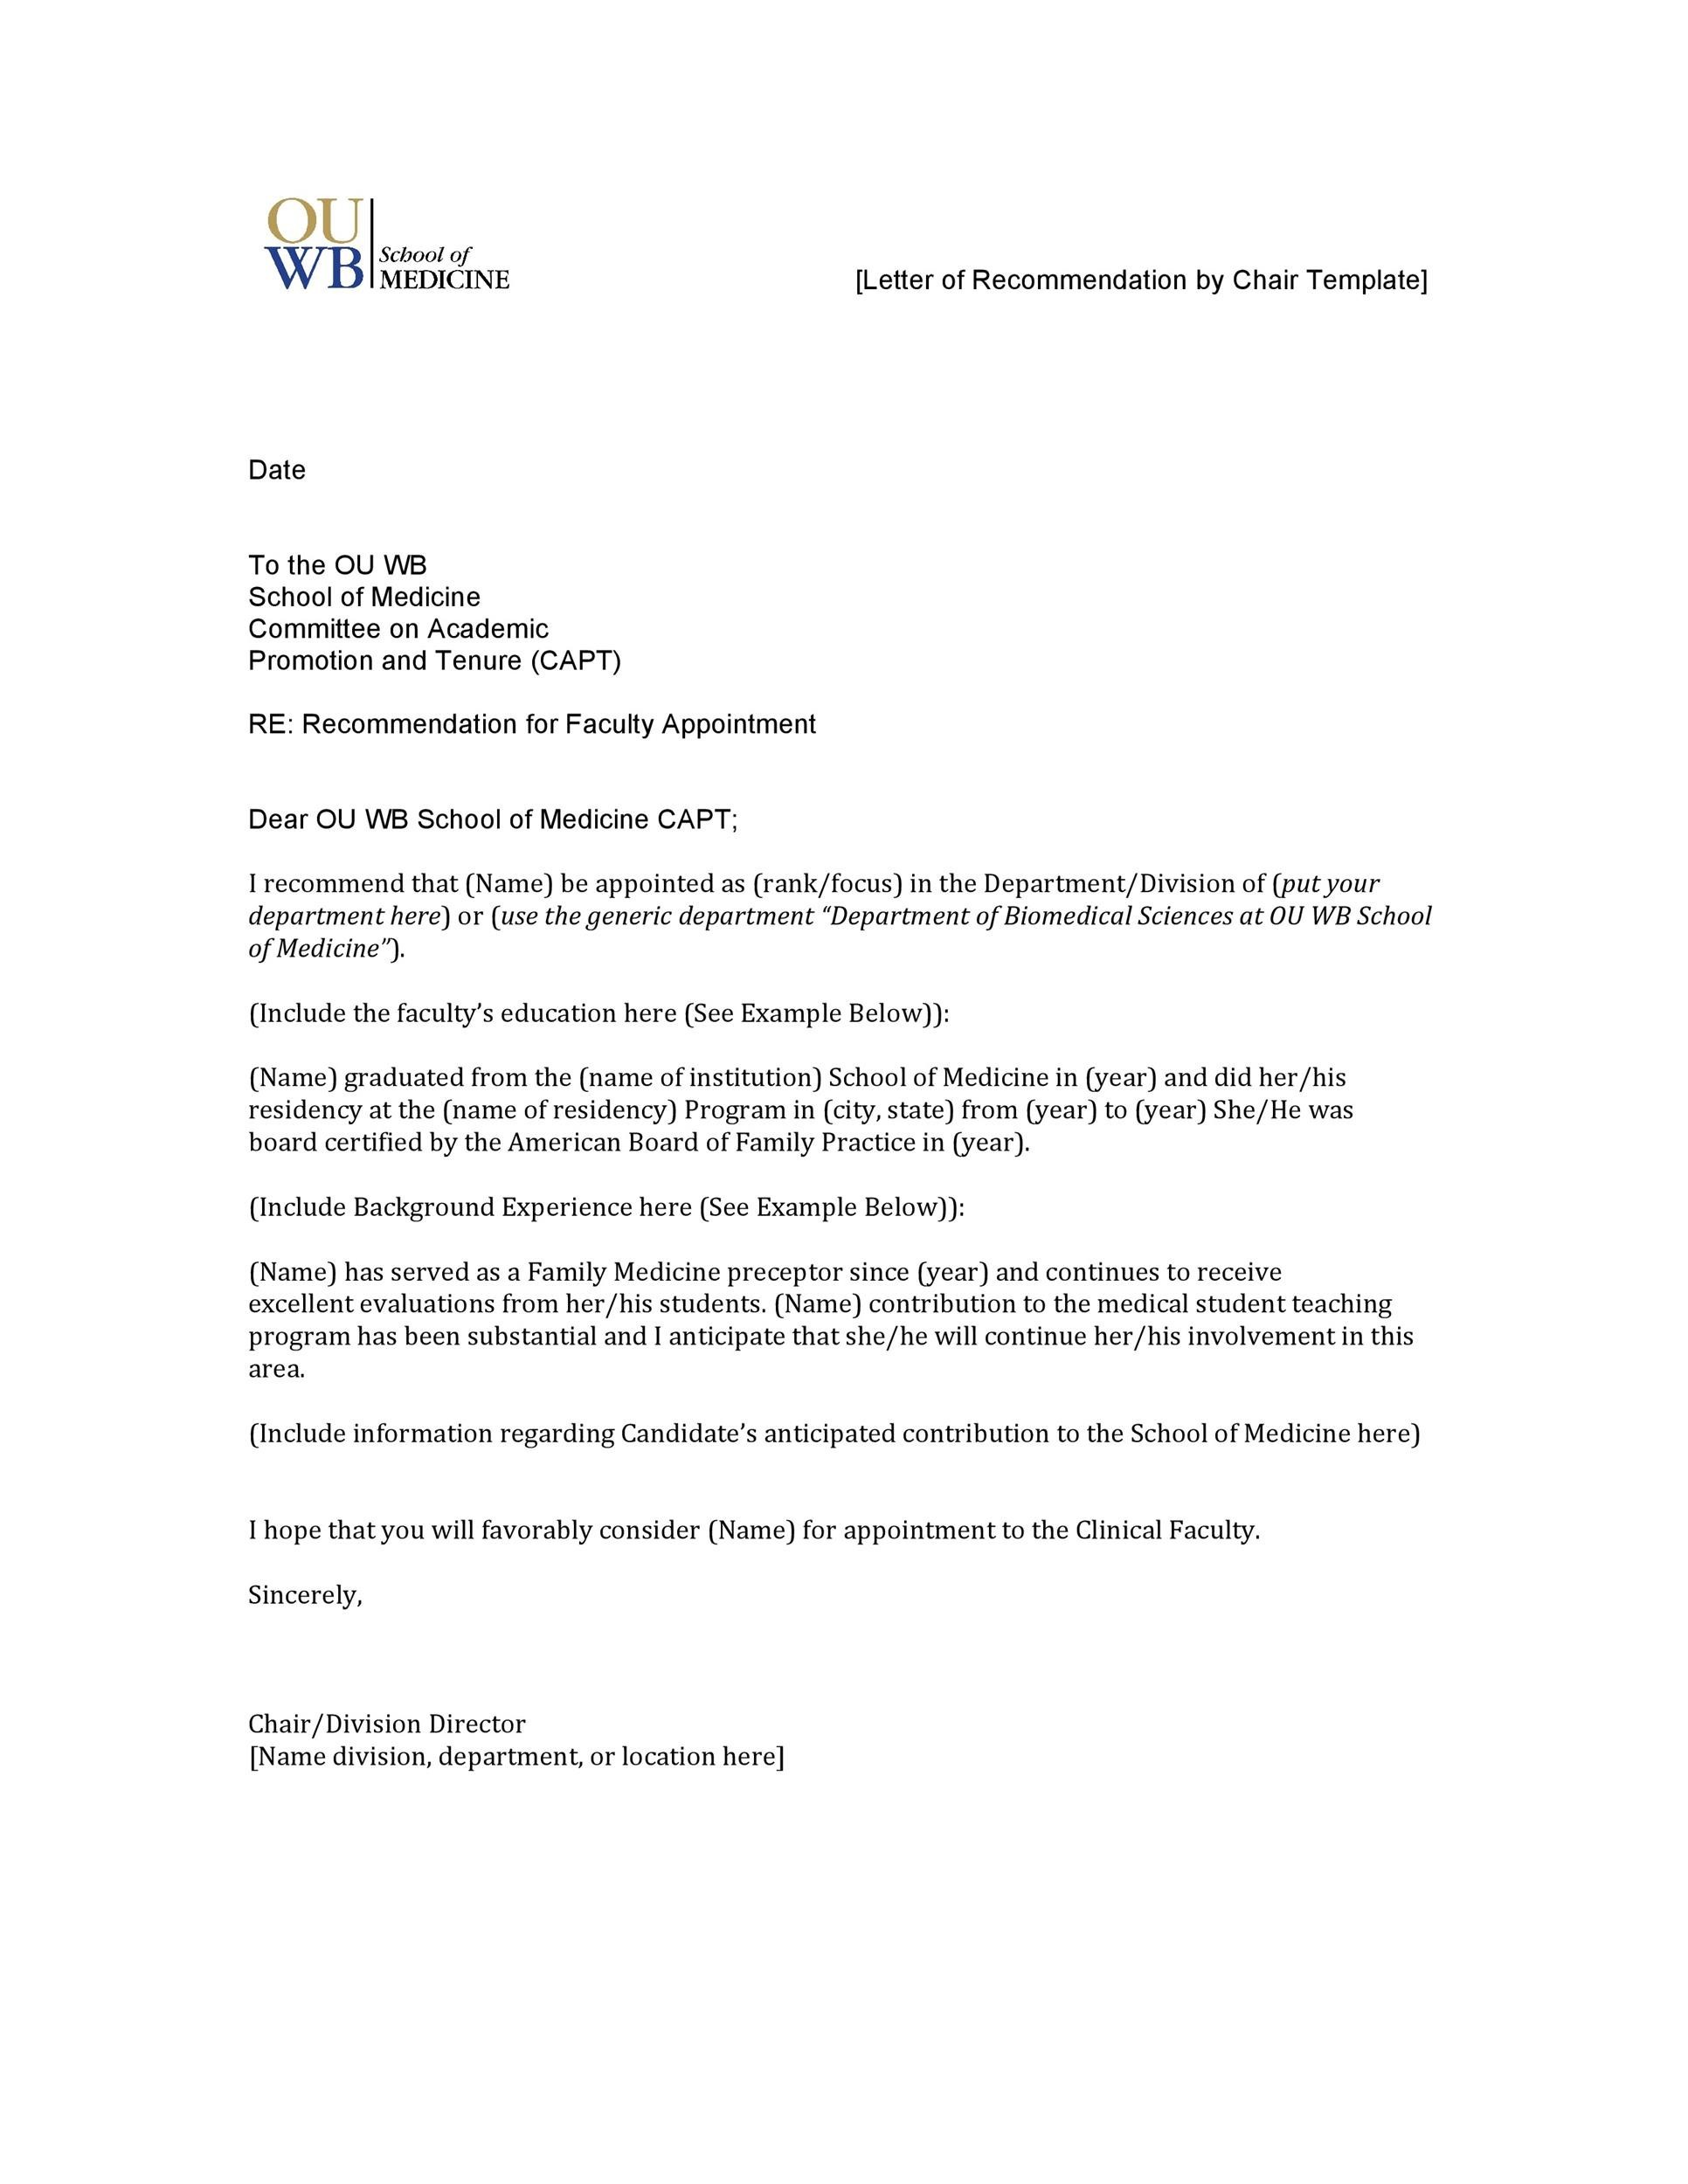 Emigrate or immigrate: Recommendation letter In Letter Of Rec Template